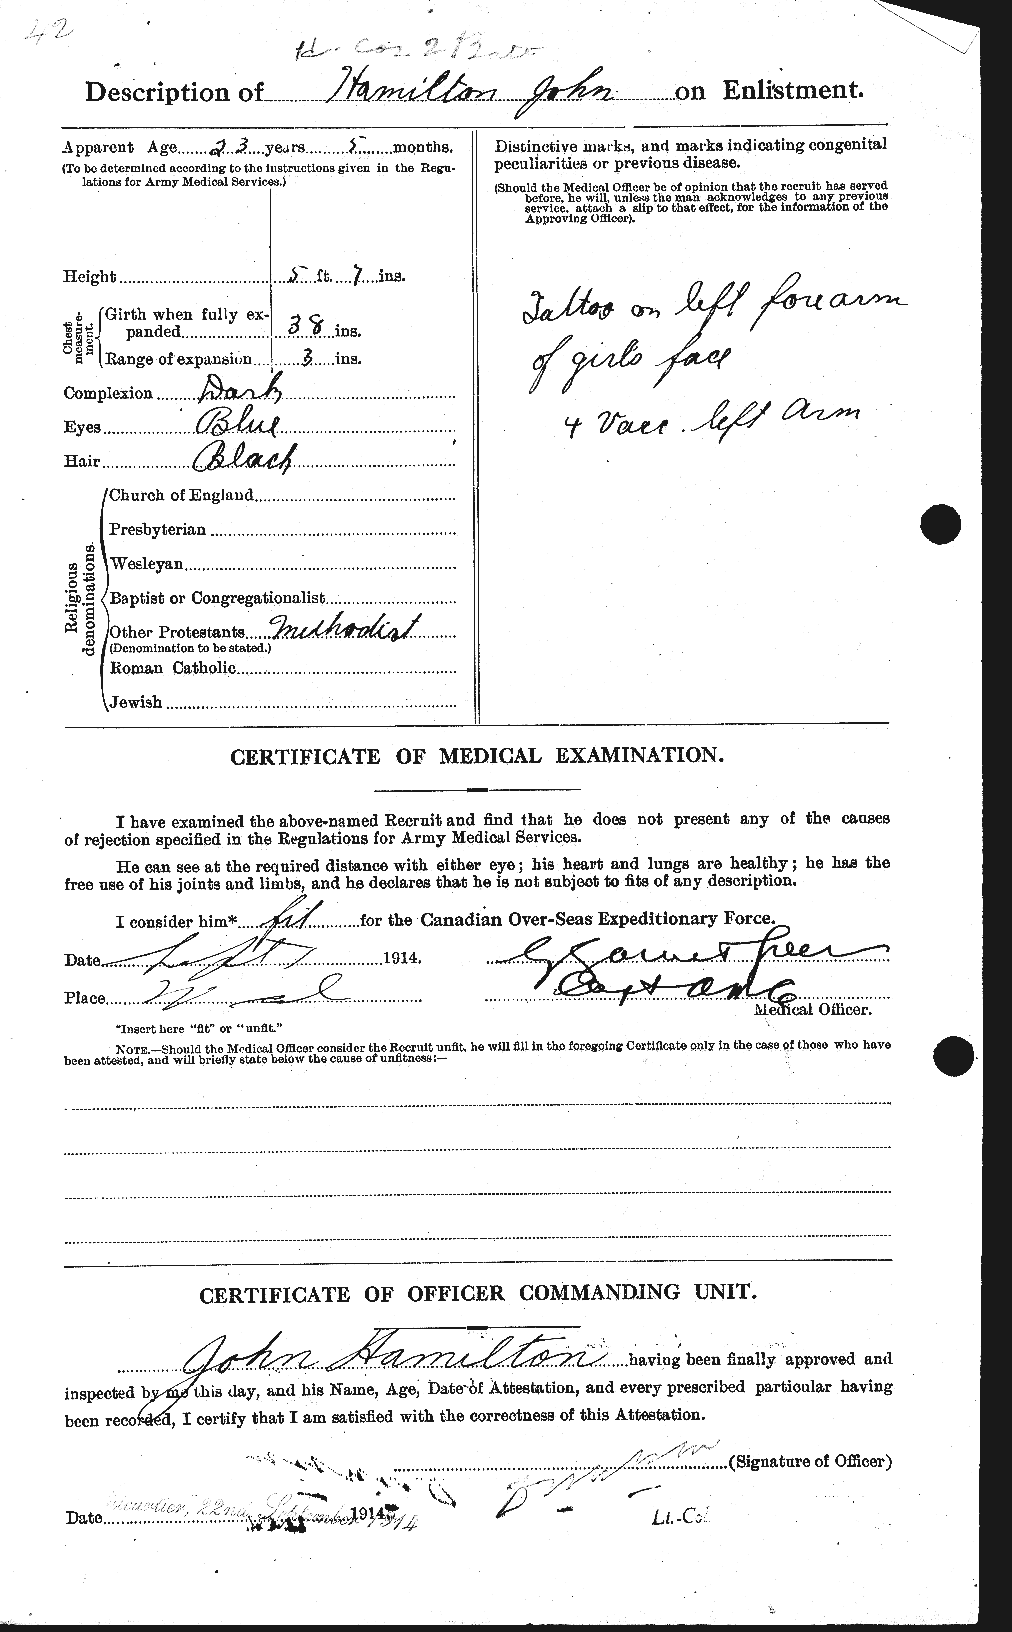 Personnel Records of the First World War - CEF 373026b